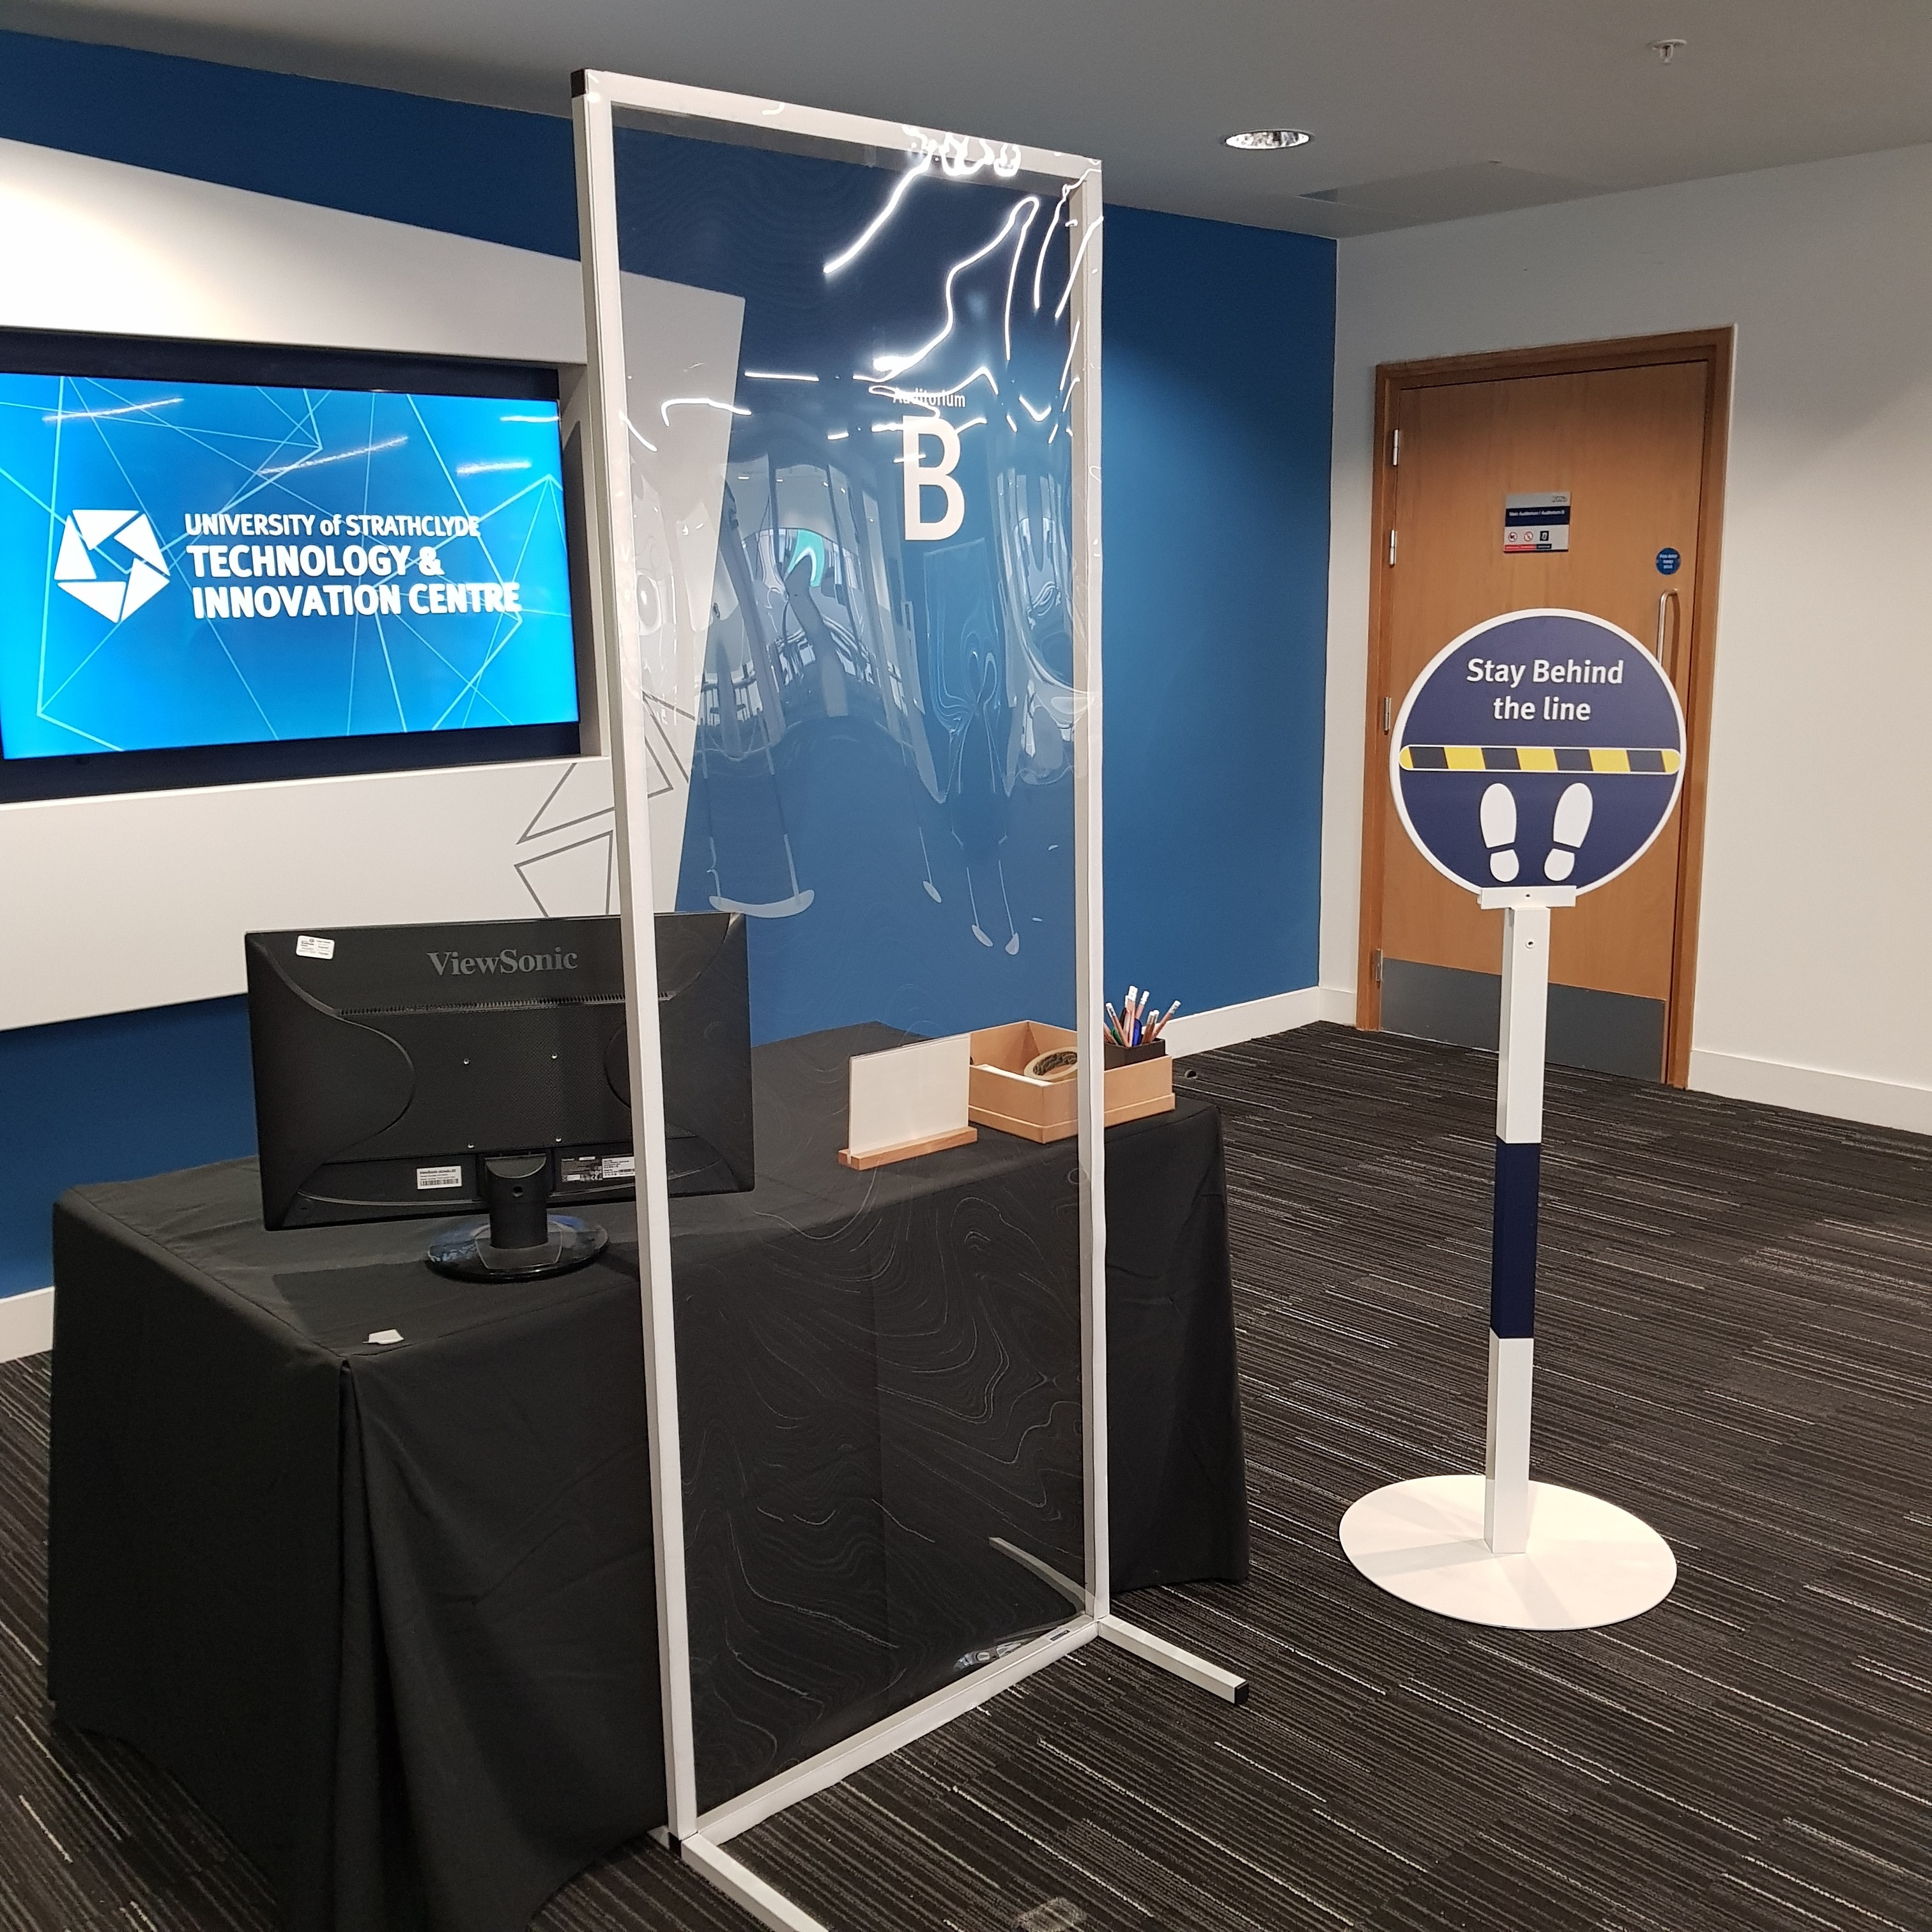 A conference organiser's desk in the Technology and Innovation Centre with safety screen and signage